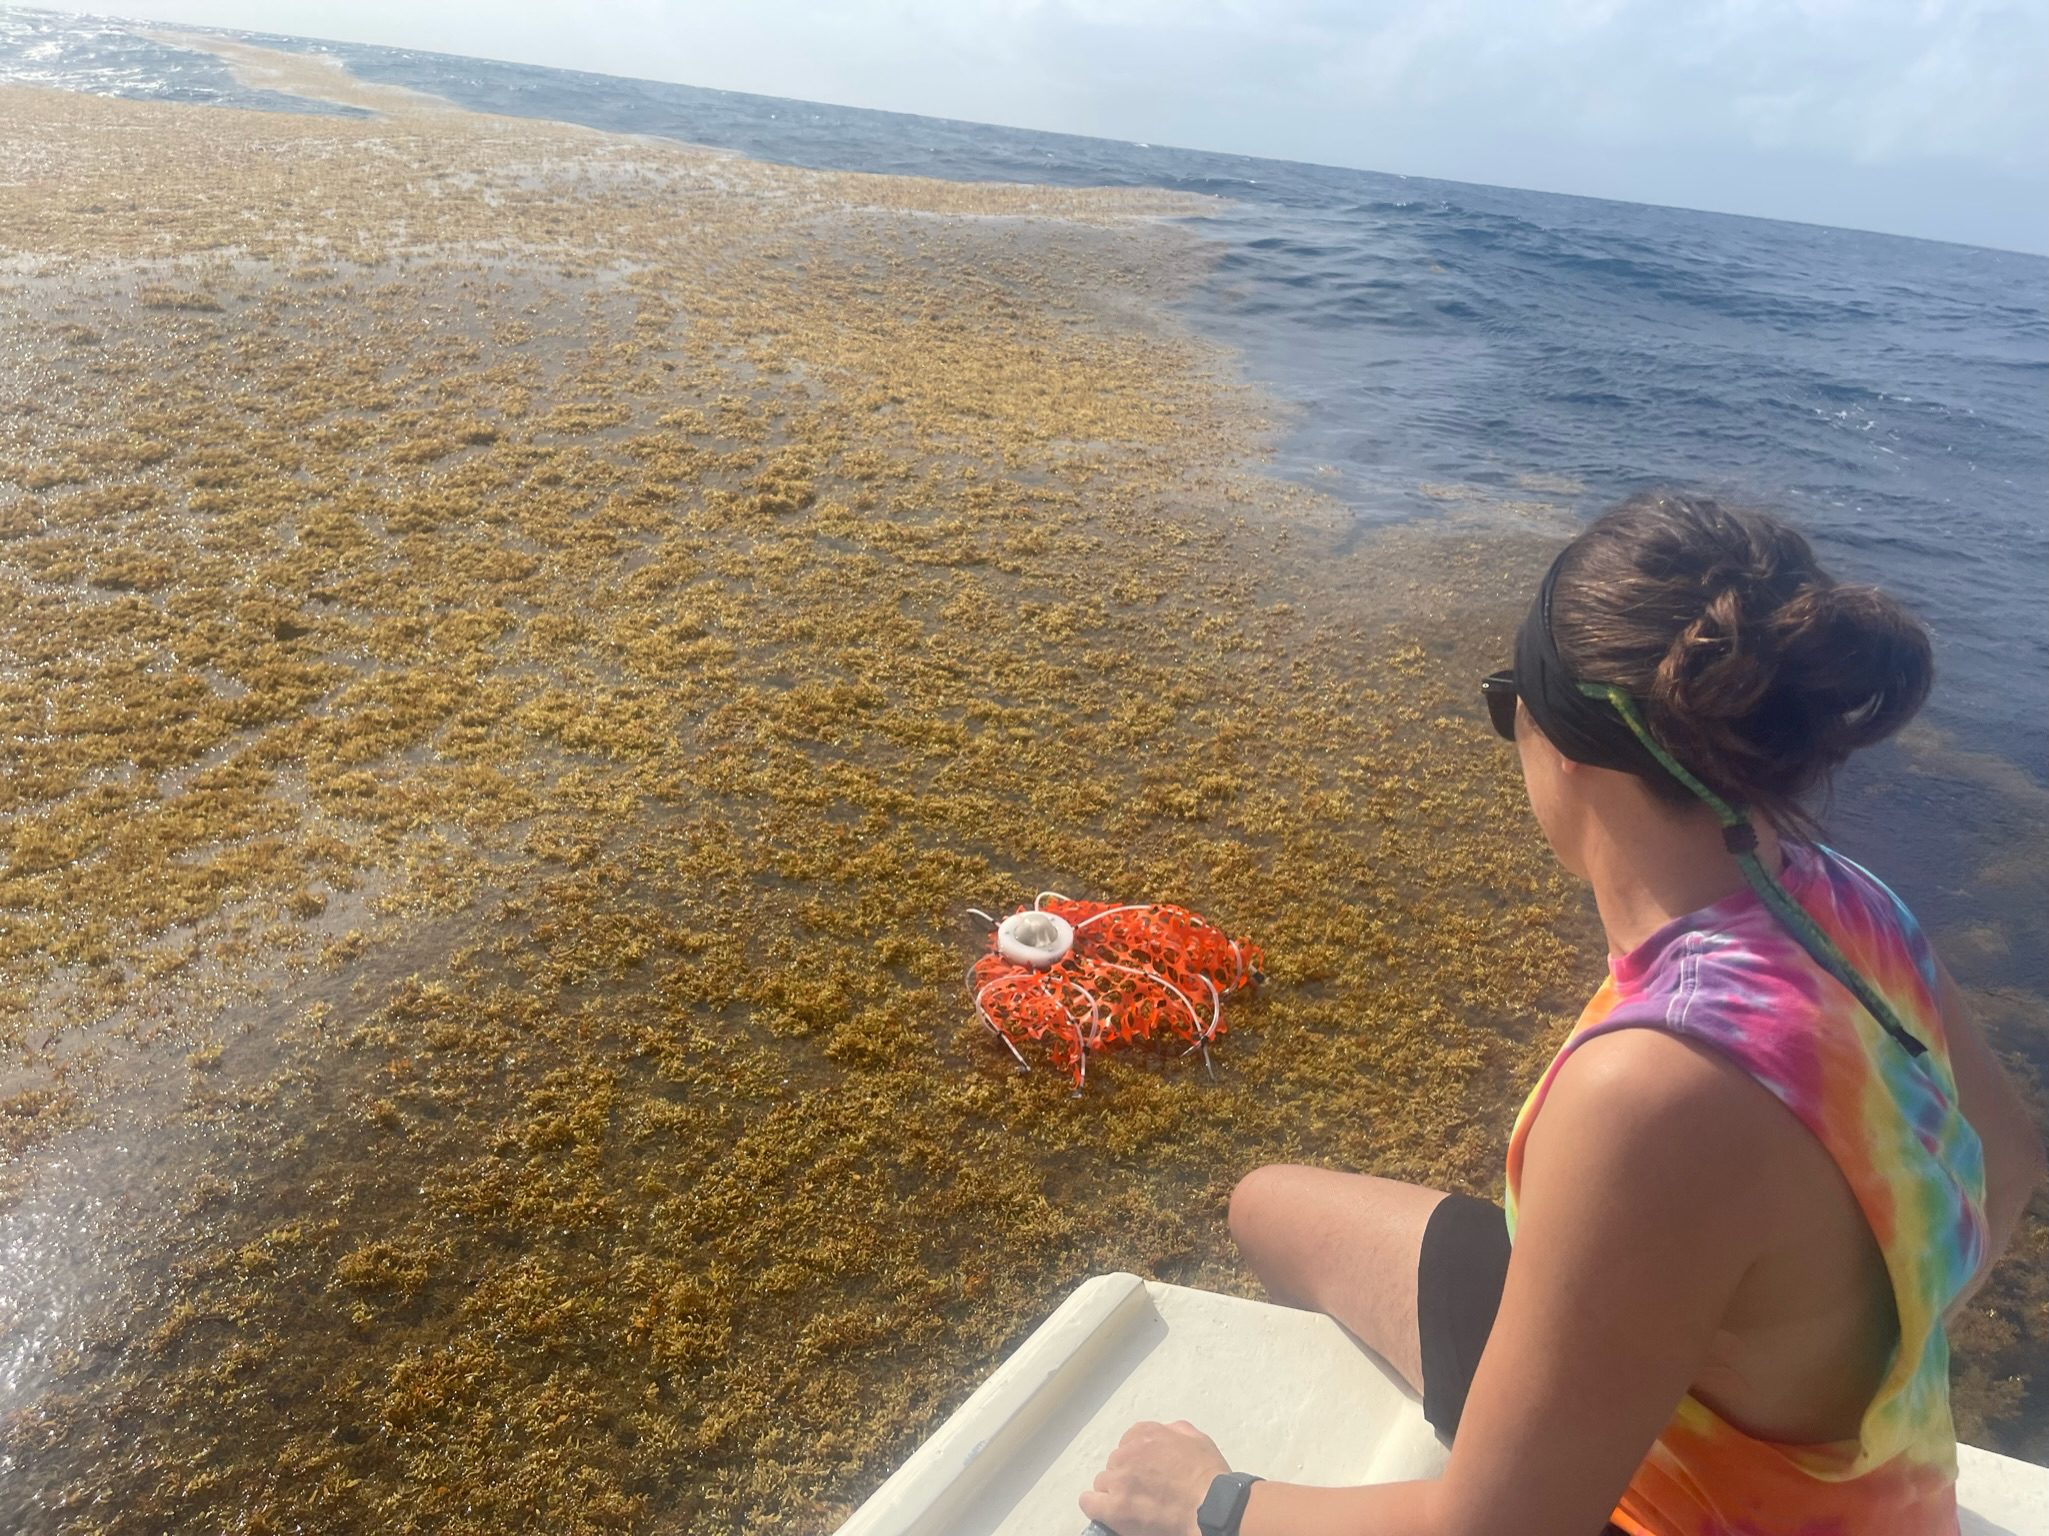 Pixa watches the GPS-equipped drifter float at the surface on a patch of sargassum in the Caribbean Sea. (Photo courtesy of Chase Pixa, © Woods Hole Oceanographic Institution)